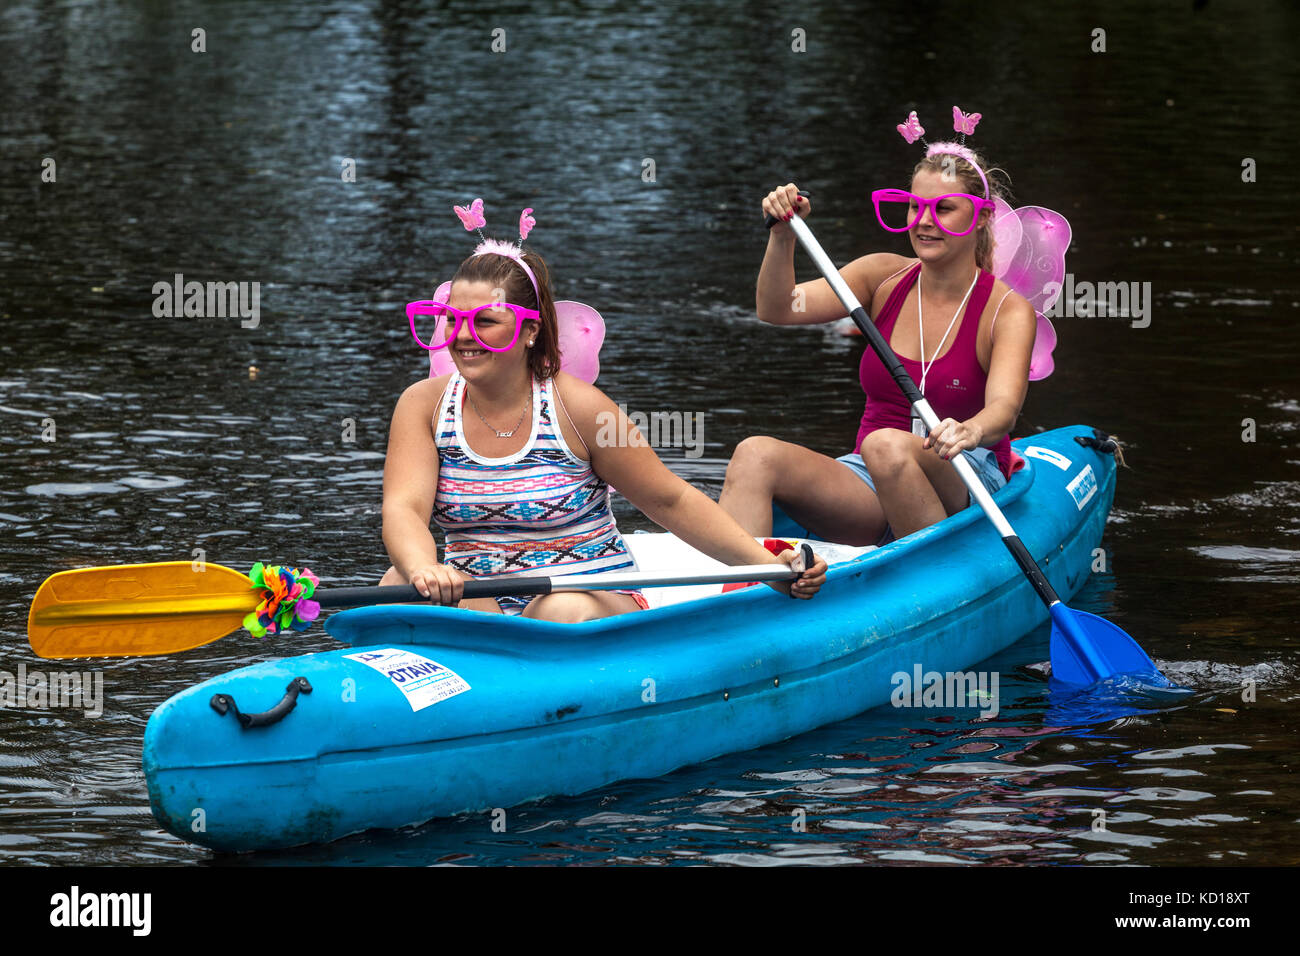 Girls in butterfly mask canoeing river Otava, Summer vacation, Czech Republic young women Stock Photo